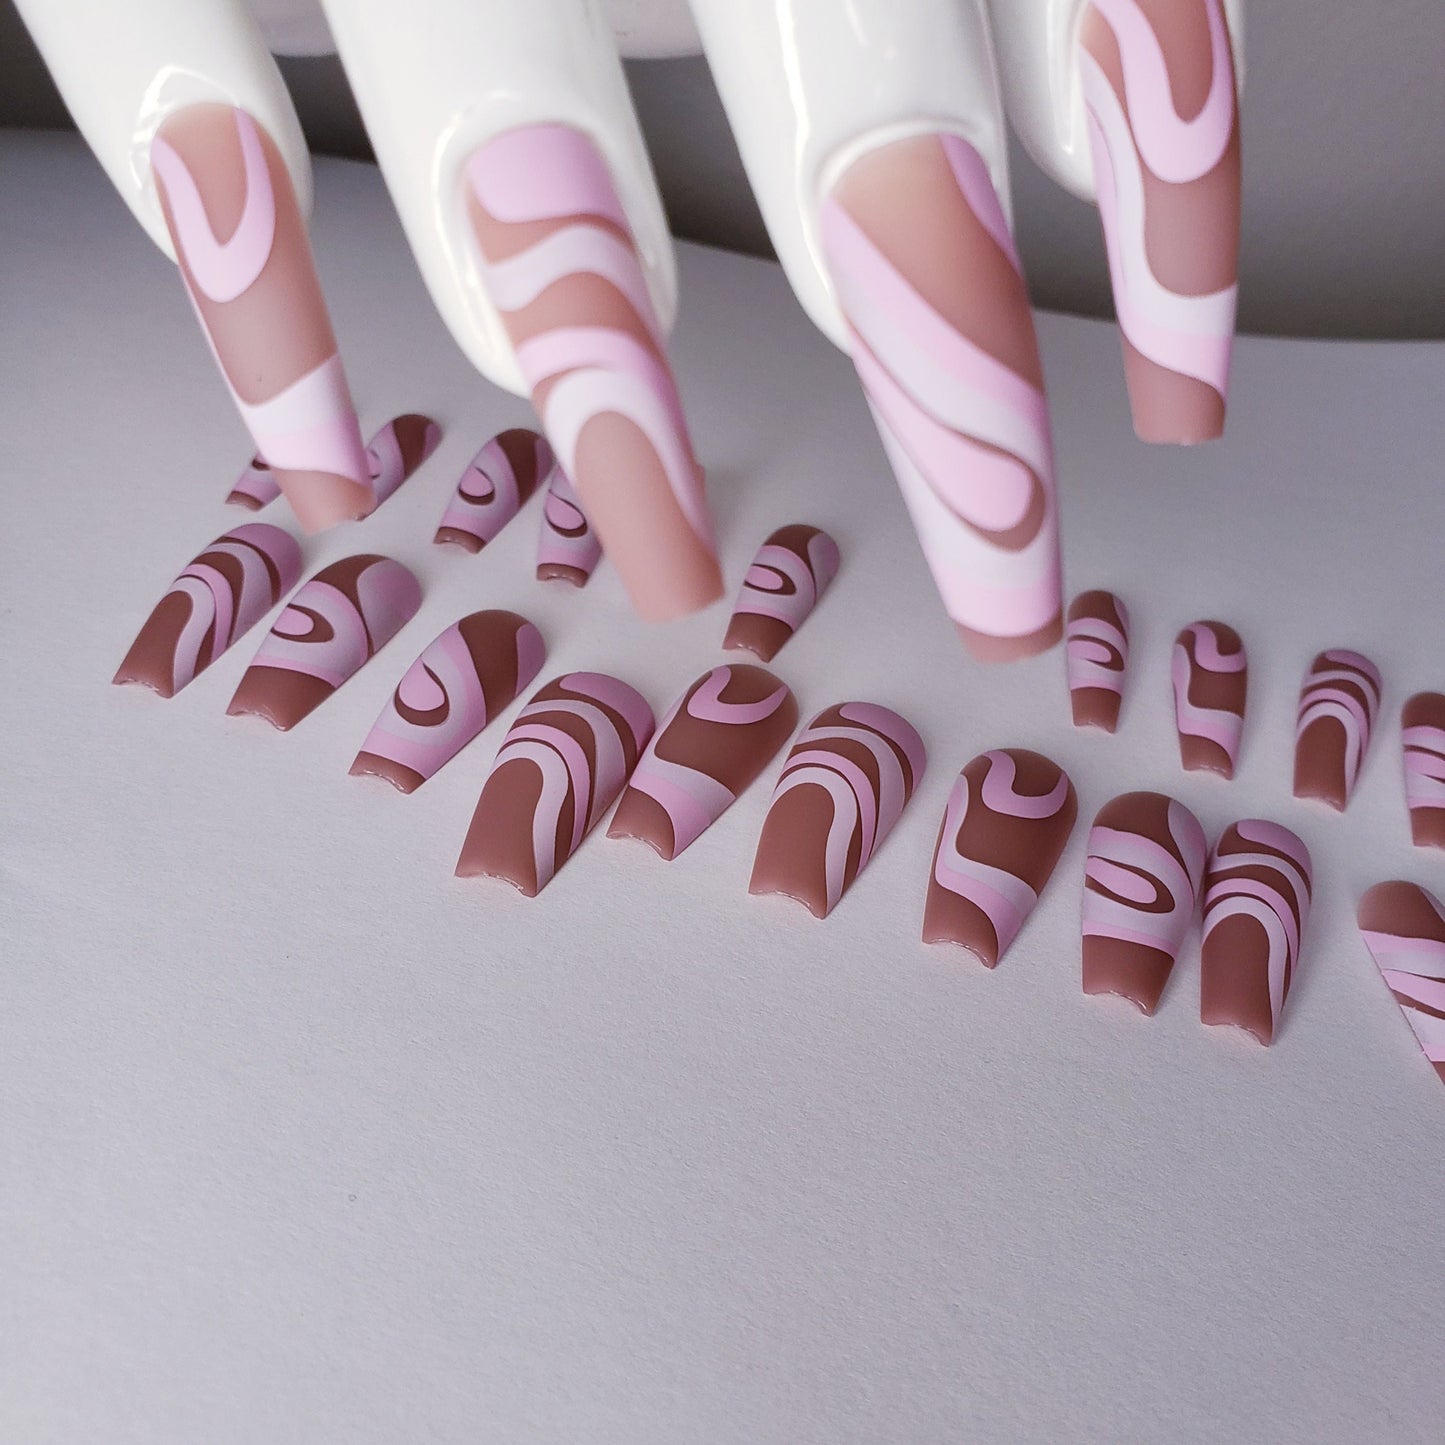 24 Nude Pink Swirl design Press on nails glue on Coffin Long extra manicure white beige tan